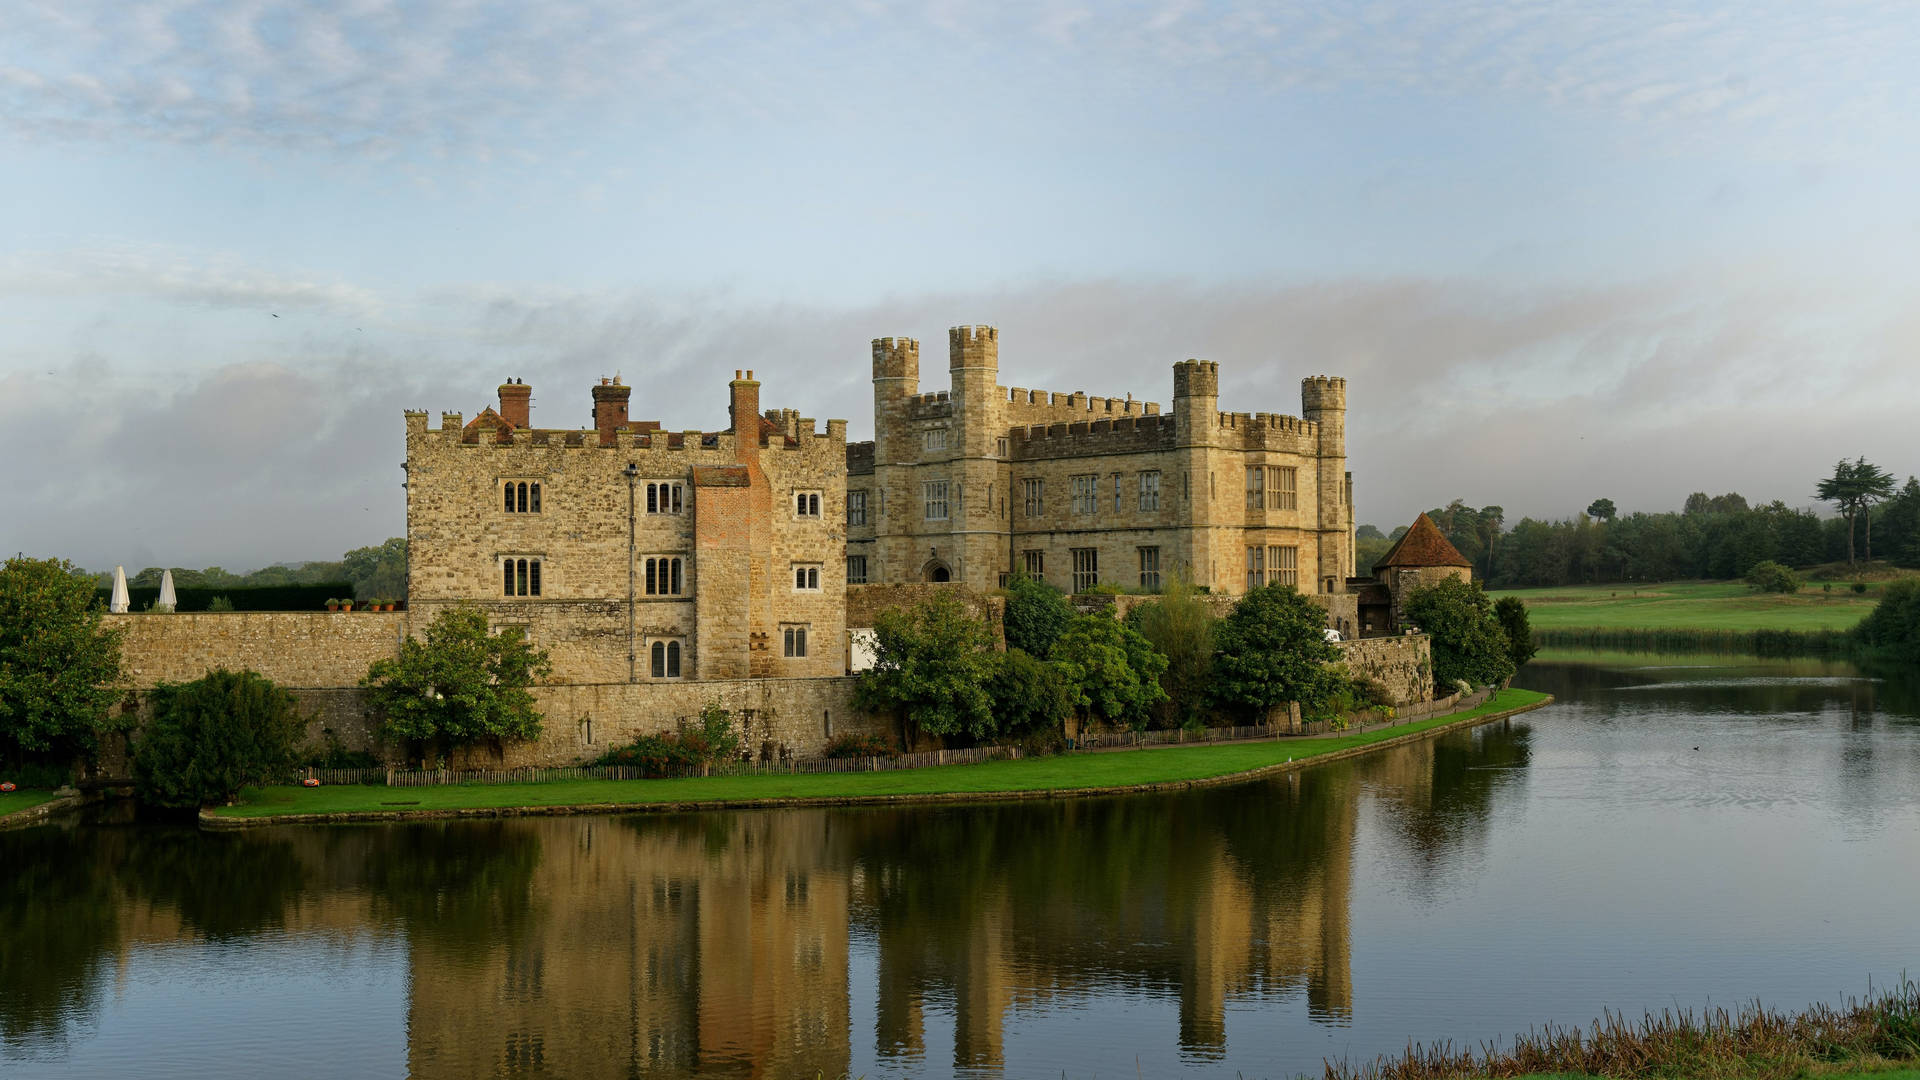 Caption: Picturesque View Of Leeds Castle In Kent, England Background